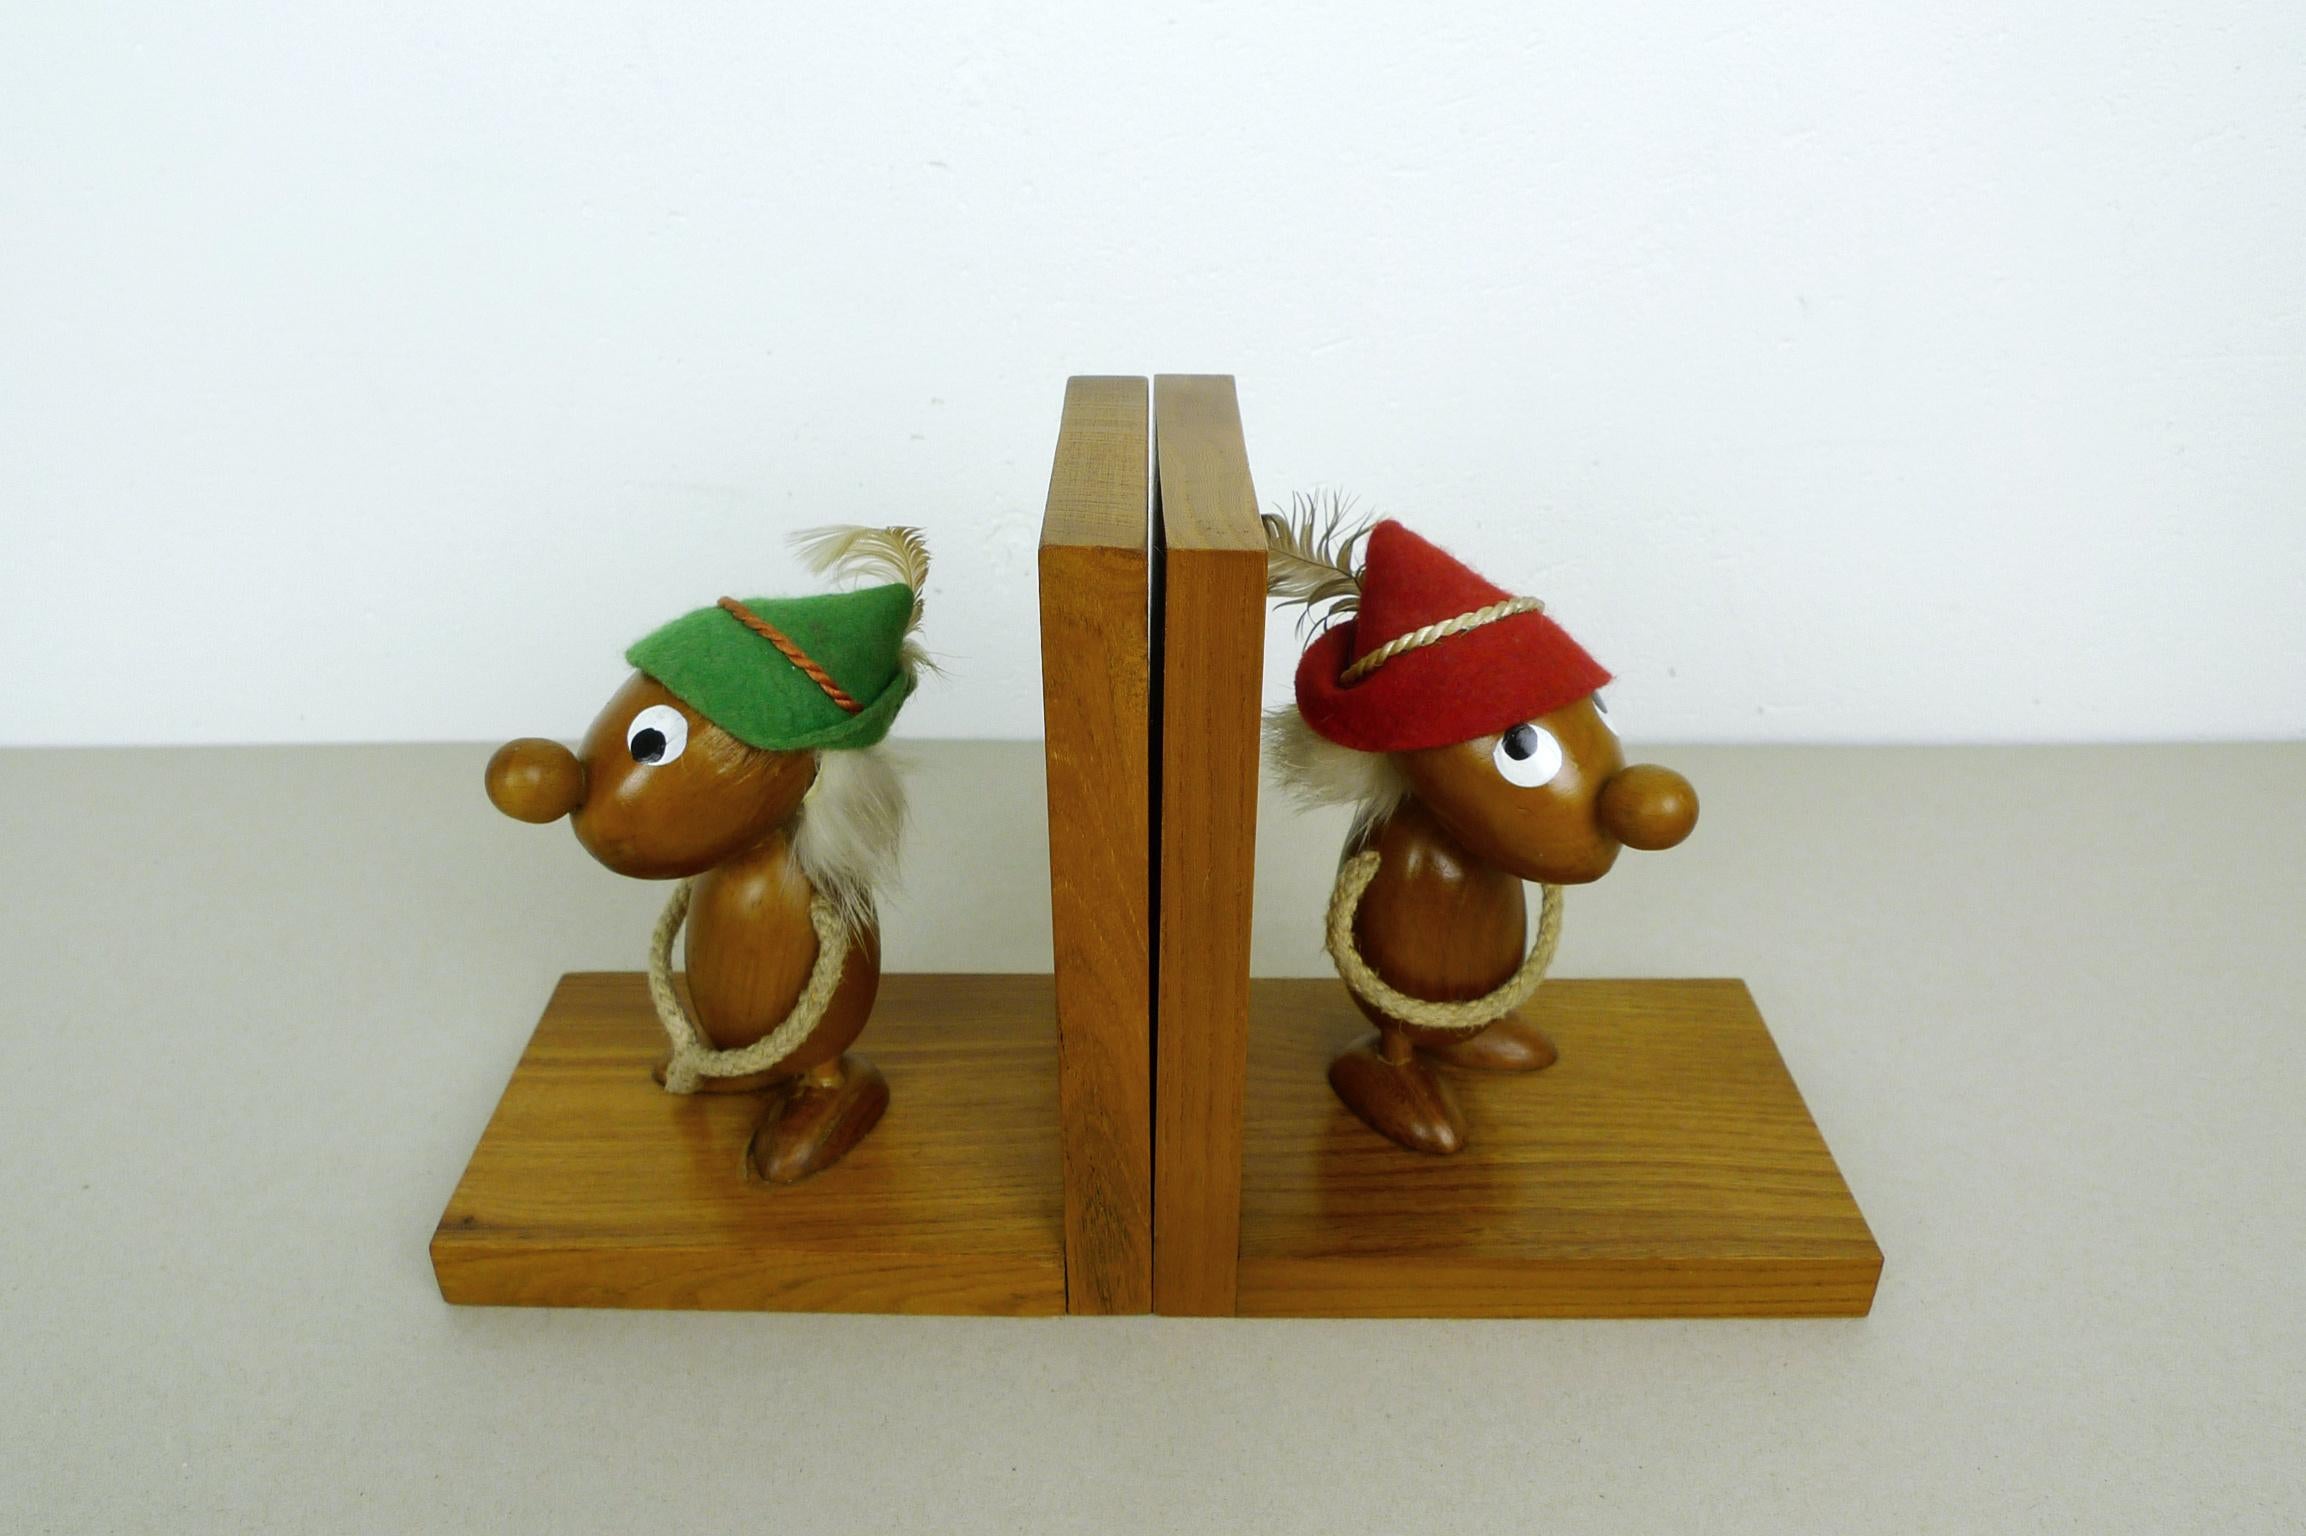 Mid-Century Modern Pair of Italian Bookends with Teak Figurines from Ciola, 1950s For Sale